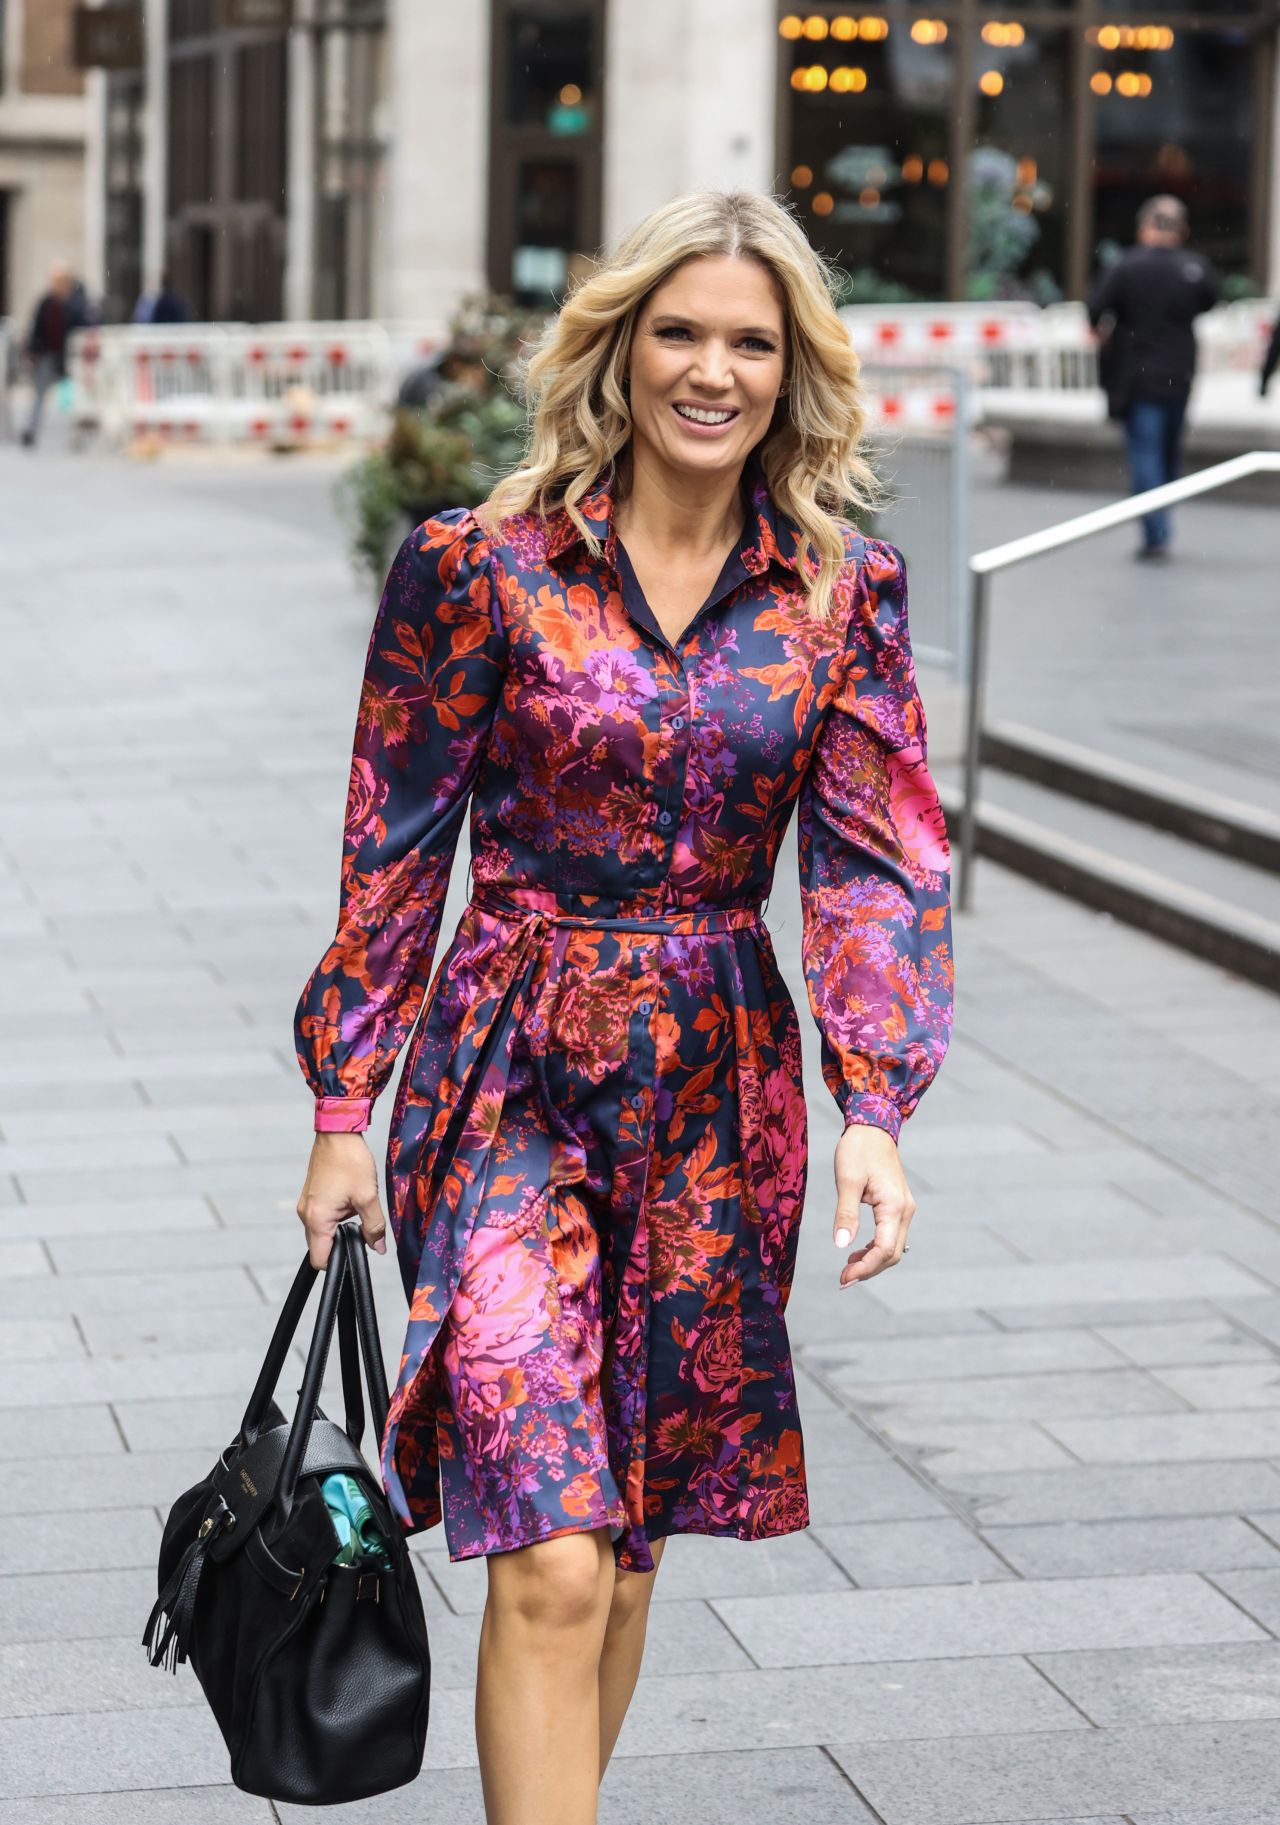 Charlotte Hawkins - Arriving for Her Classic FM Show in London 10/18 ...